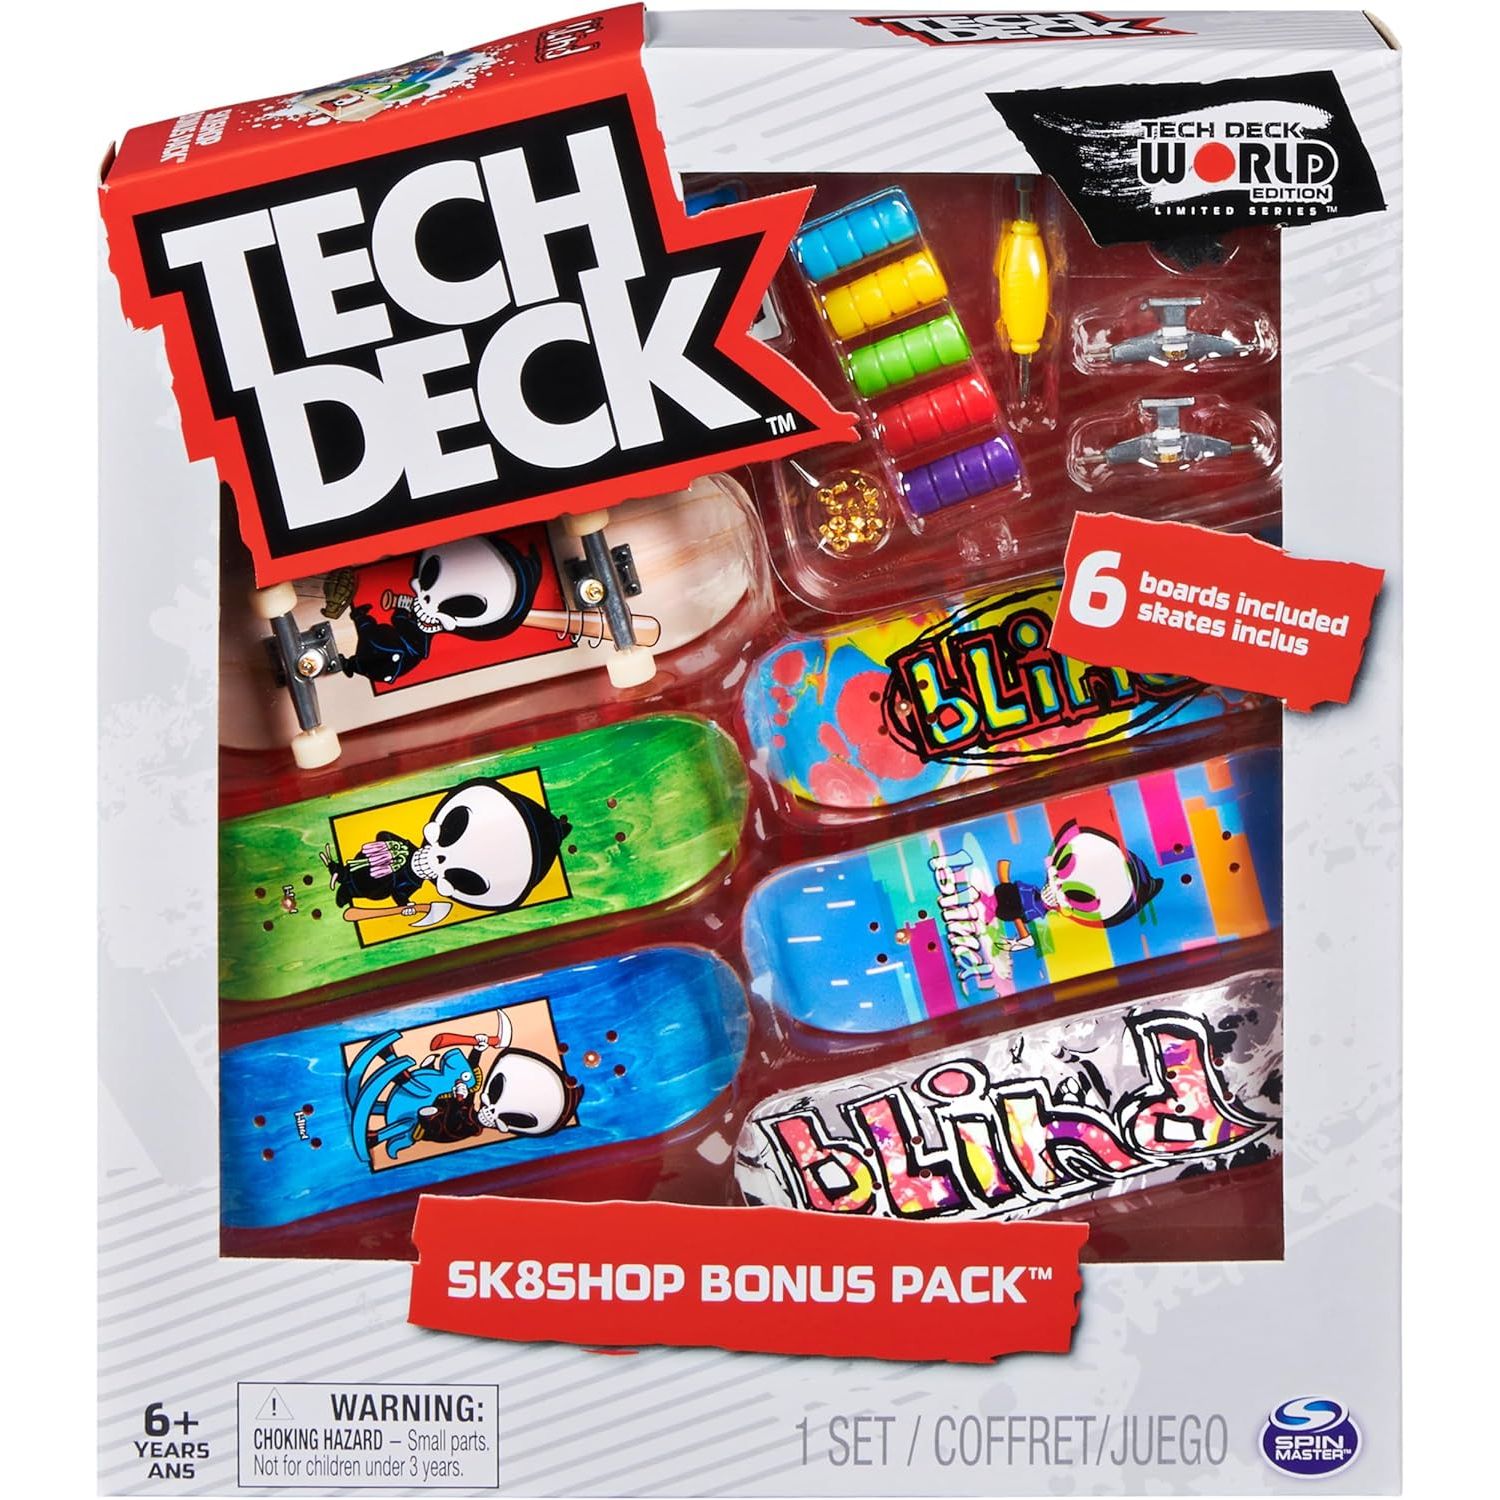 TECH DECK, Sk8shop Fingerboard Bonus Pack, Collectible and Customizable Mini Skateboards, Kids Toys for Ages 6 and up (Styles May Vary)